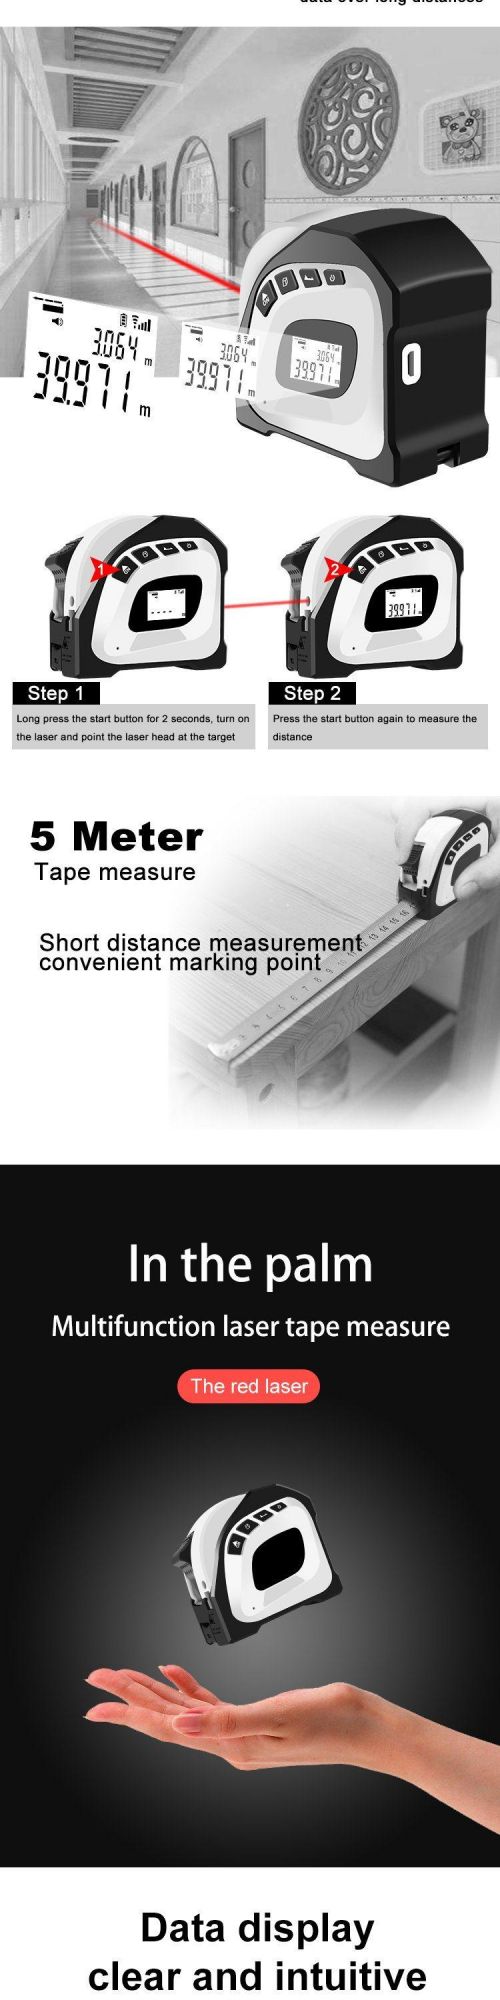 New Product 2 in 1 Laser Distance Meter Tape Measure 40m